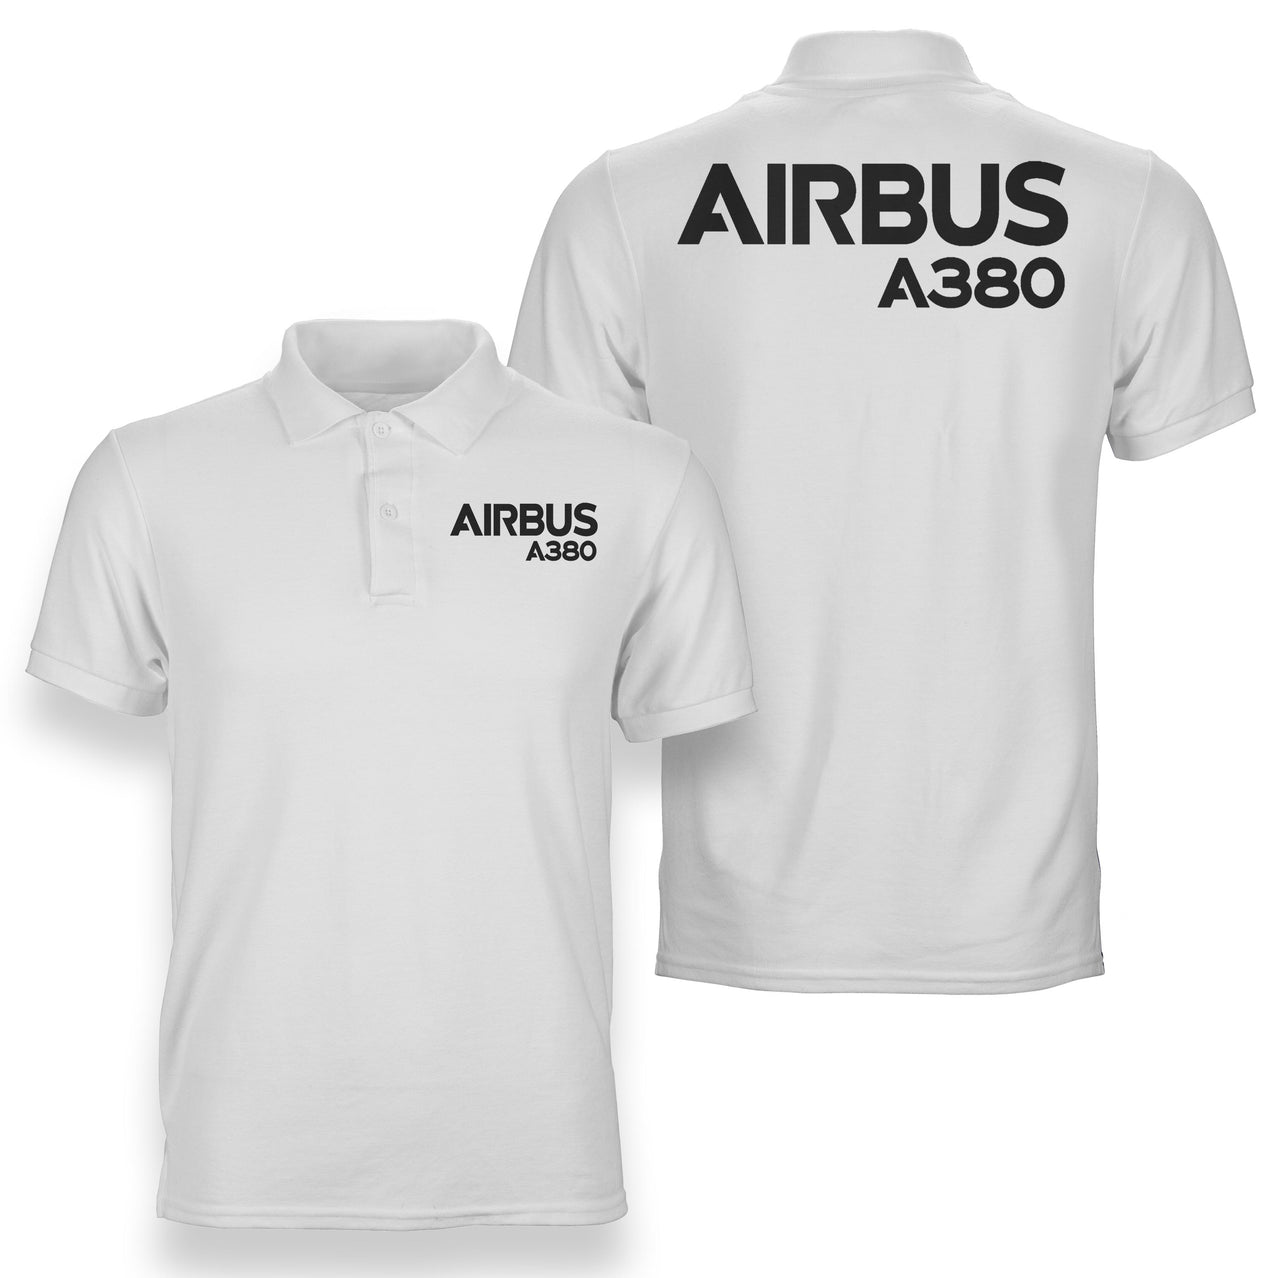 Airbus A380 & Text Designed Double Side Polo T-Shirts